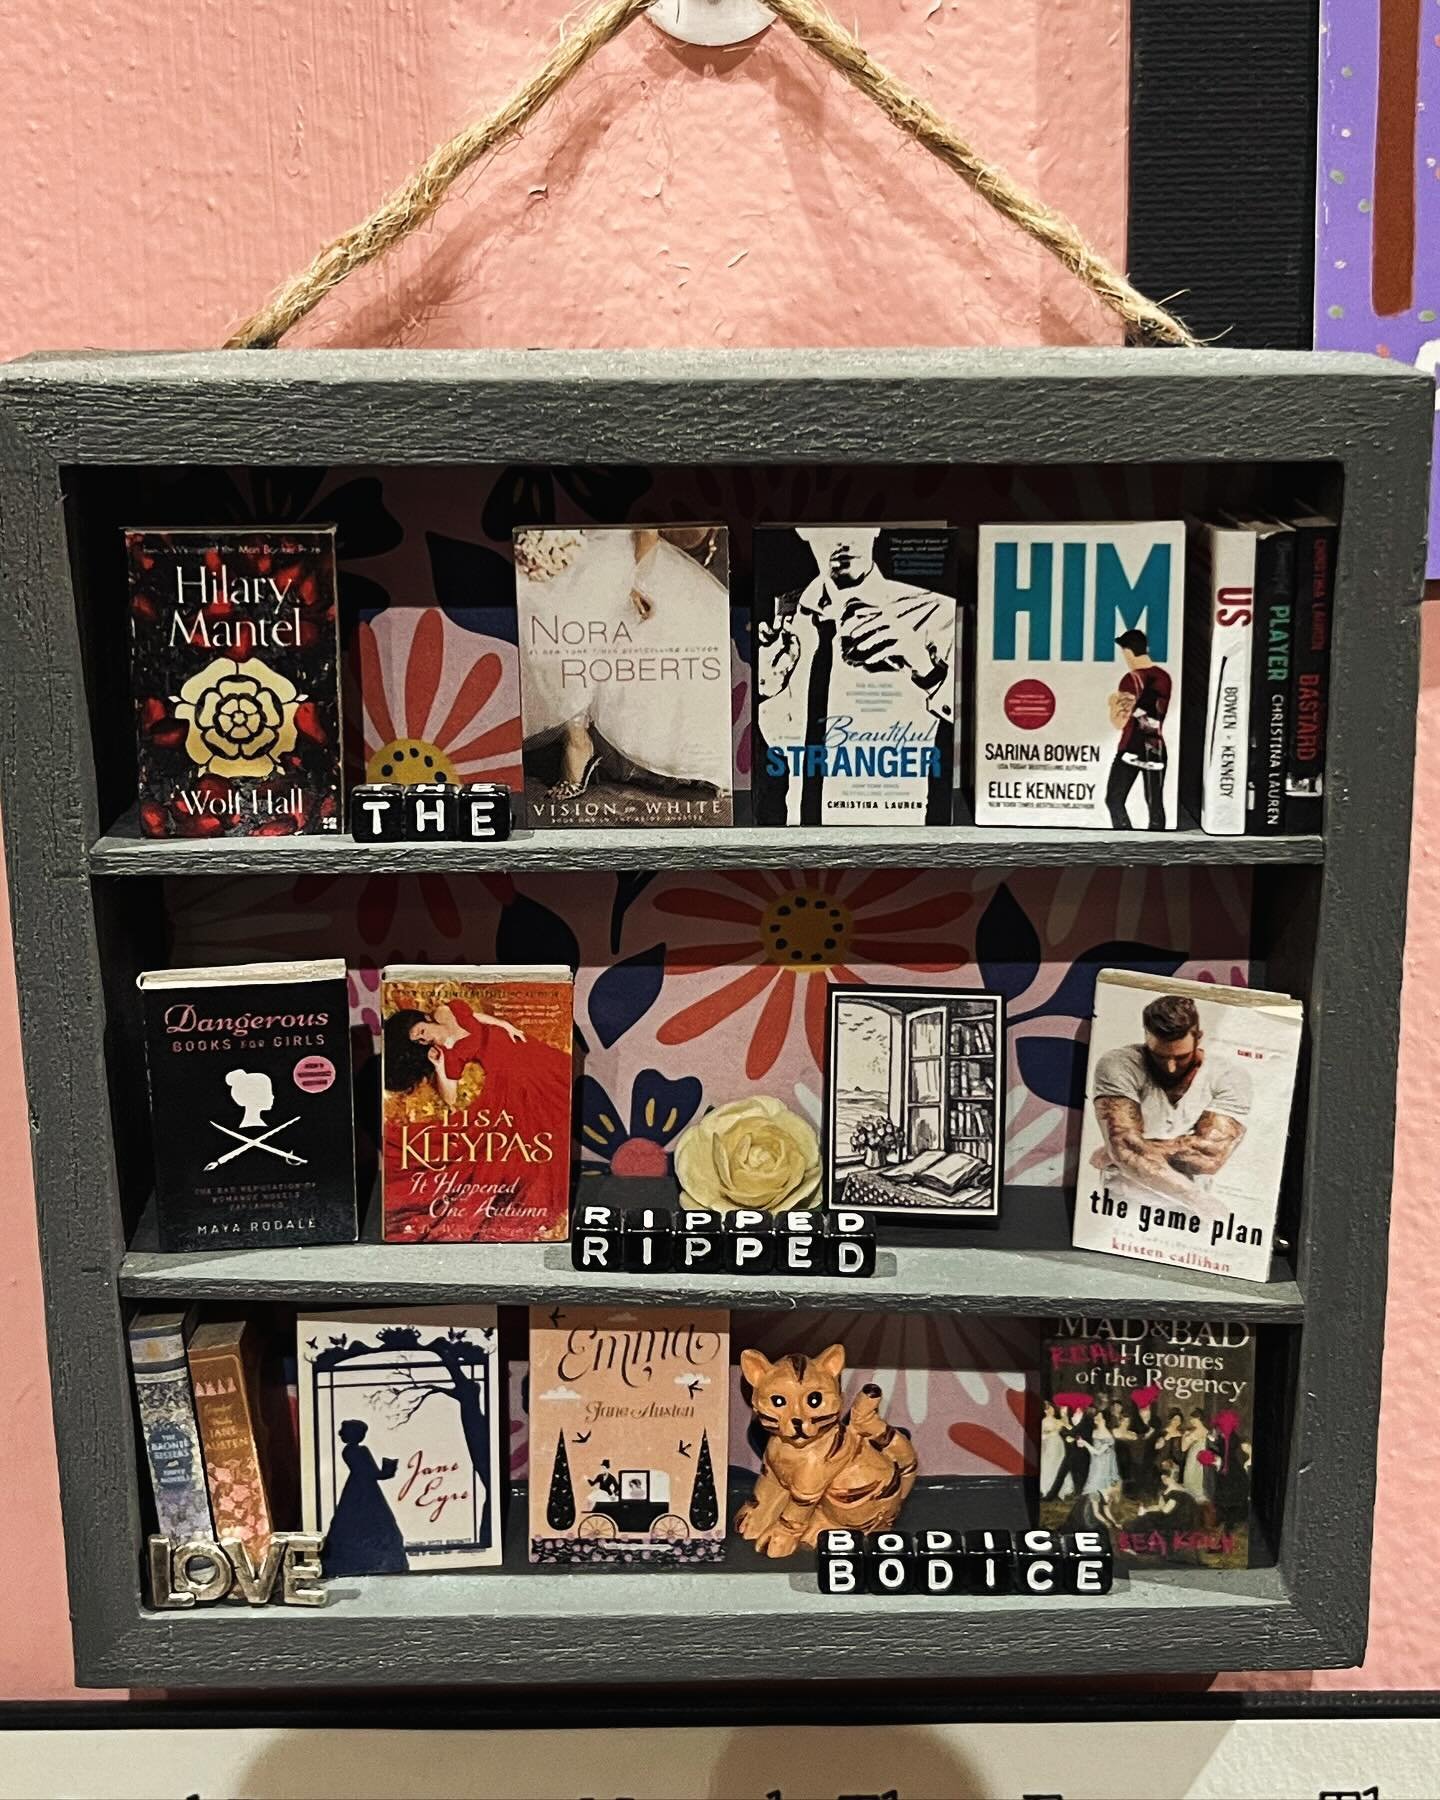 Popped into The Ripped Bodice this weekend! How cute is this teeny tiny bookshelf? Also got a copy of Pas de Don&rsquo;t, which has been on my TBR for a long time. 

#books #bookstagram #bookstores #romancebooks #shoplocal #tbr